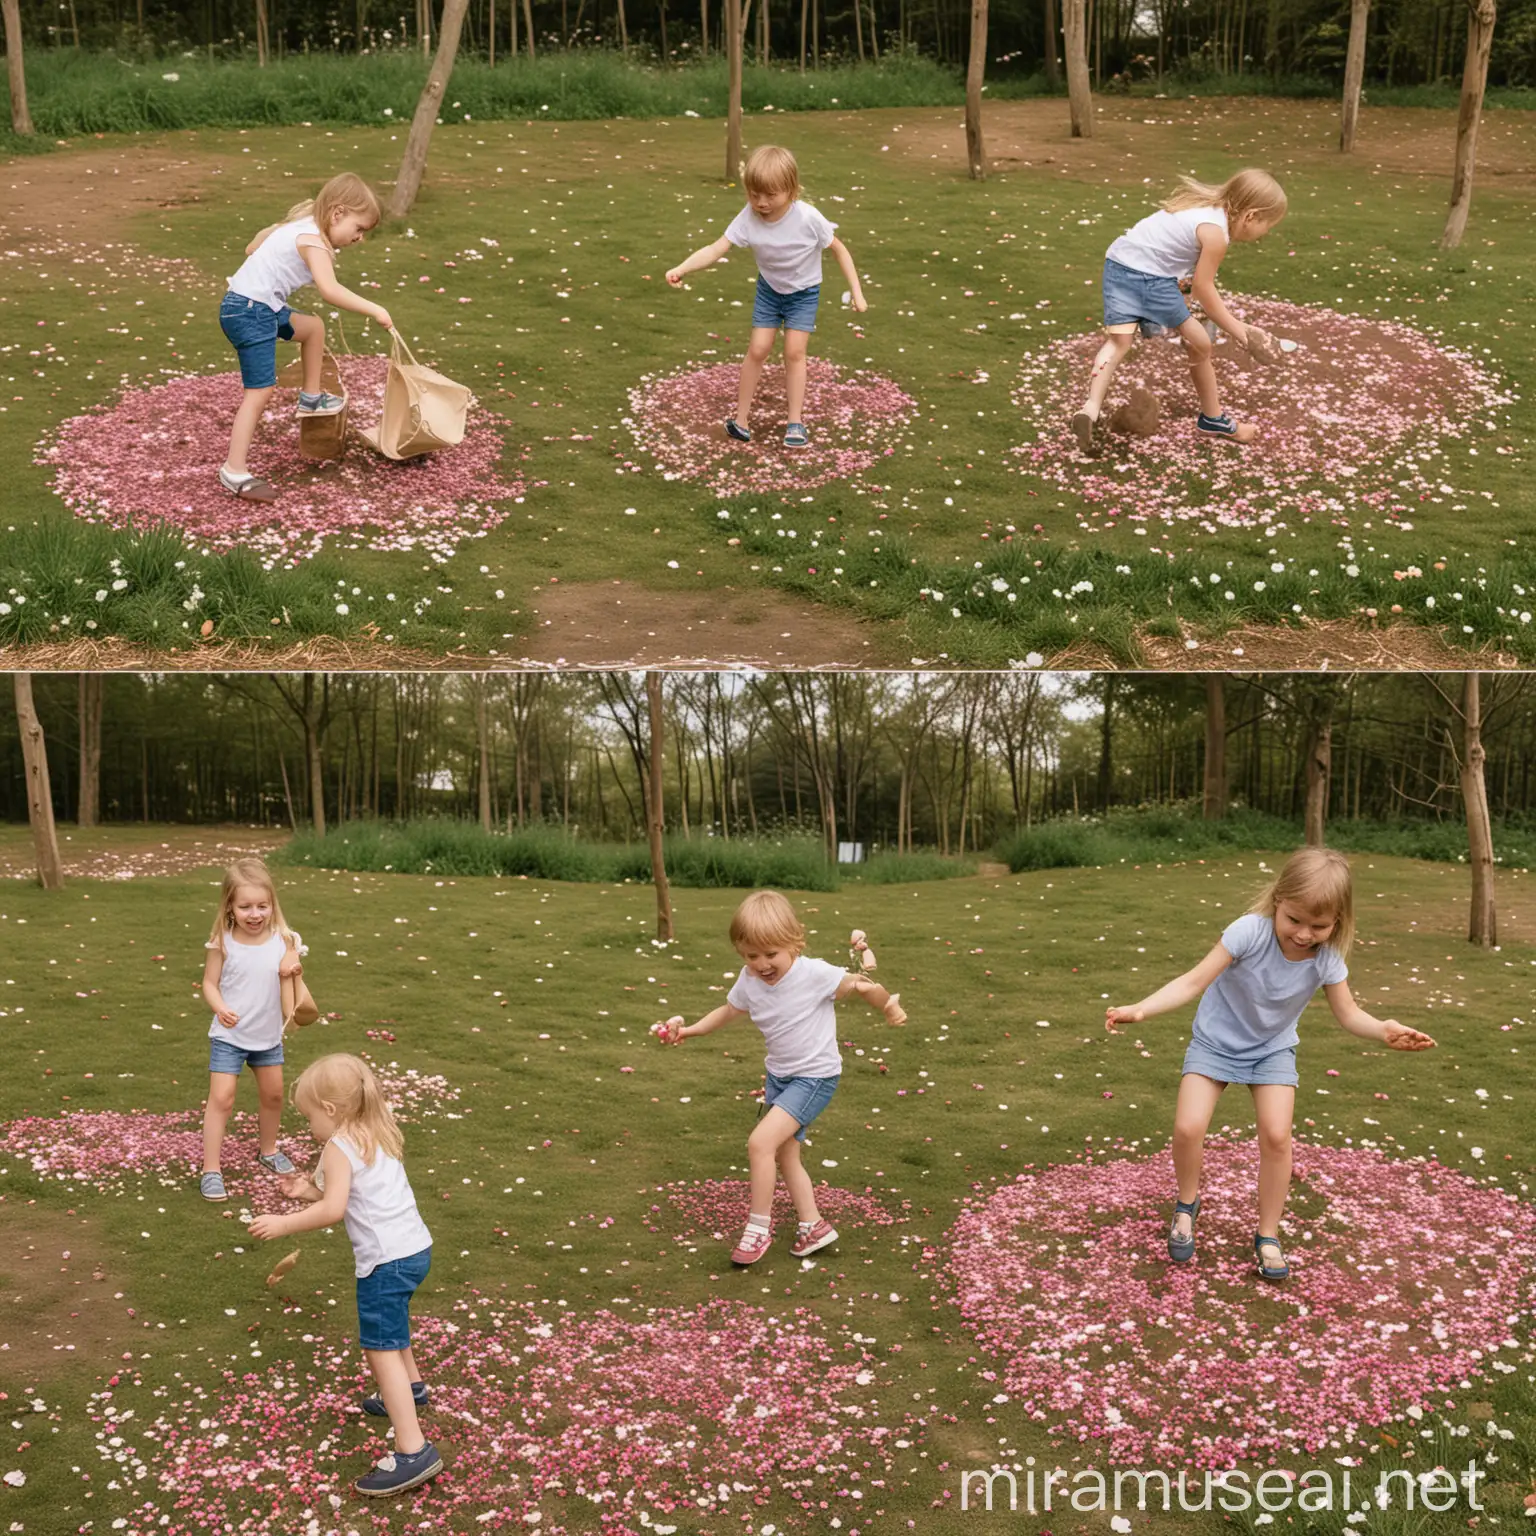 pictures in a natural-playground with 5 young children playing and petals fowling and on the floor